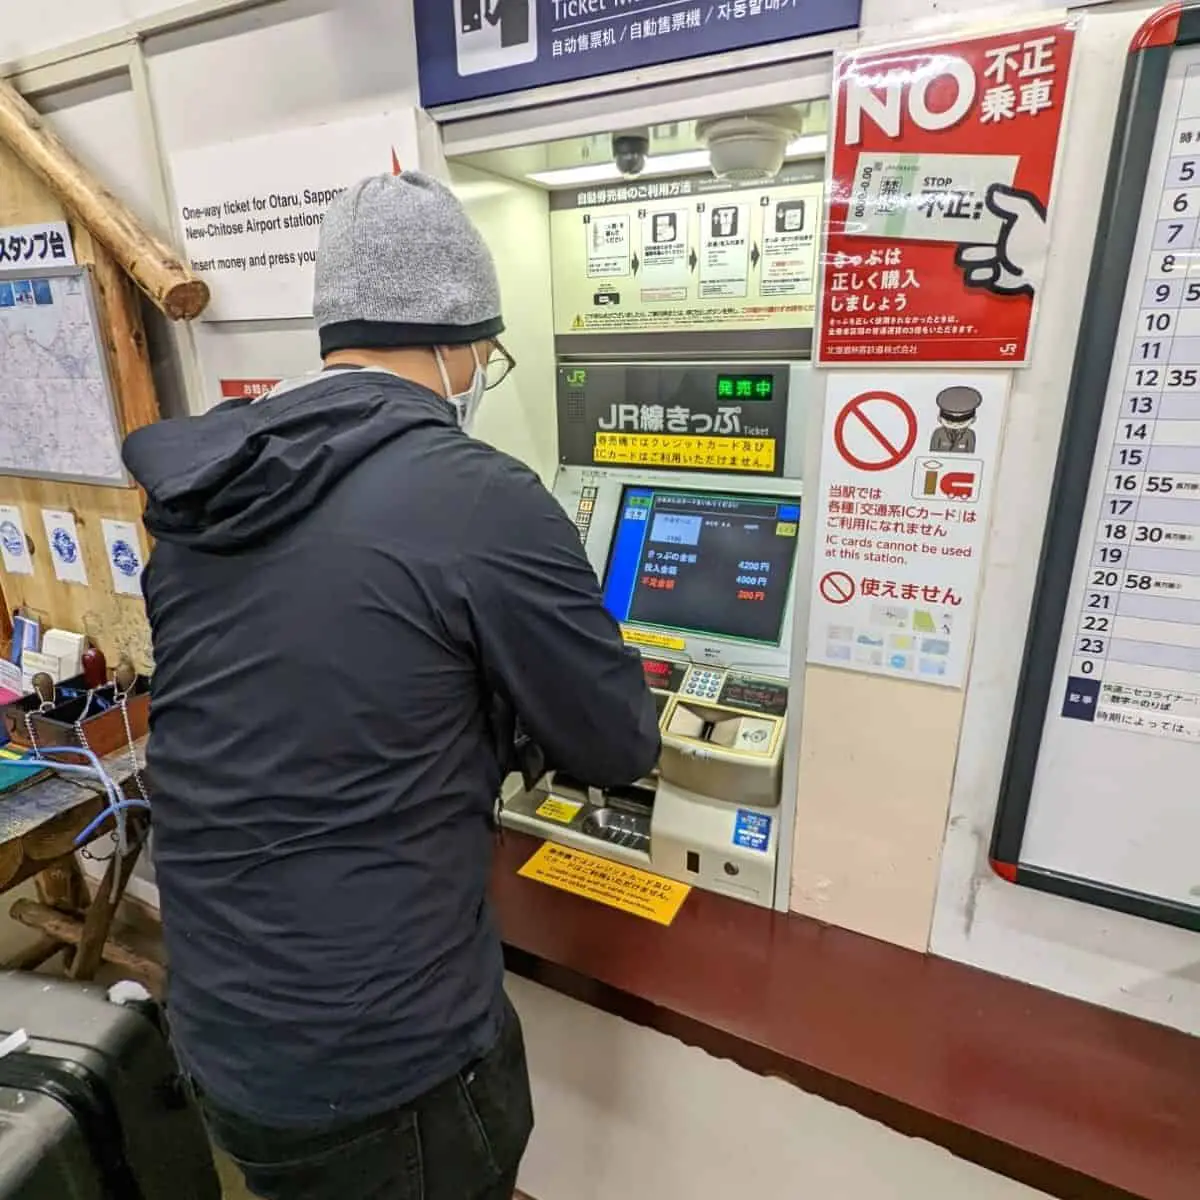 Buying Japanese train tickets at booth